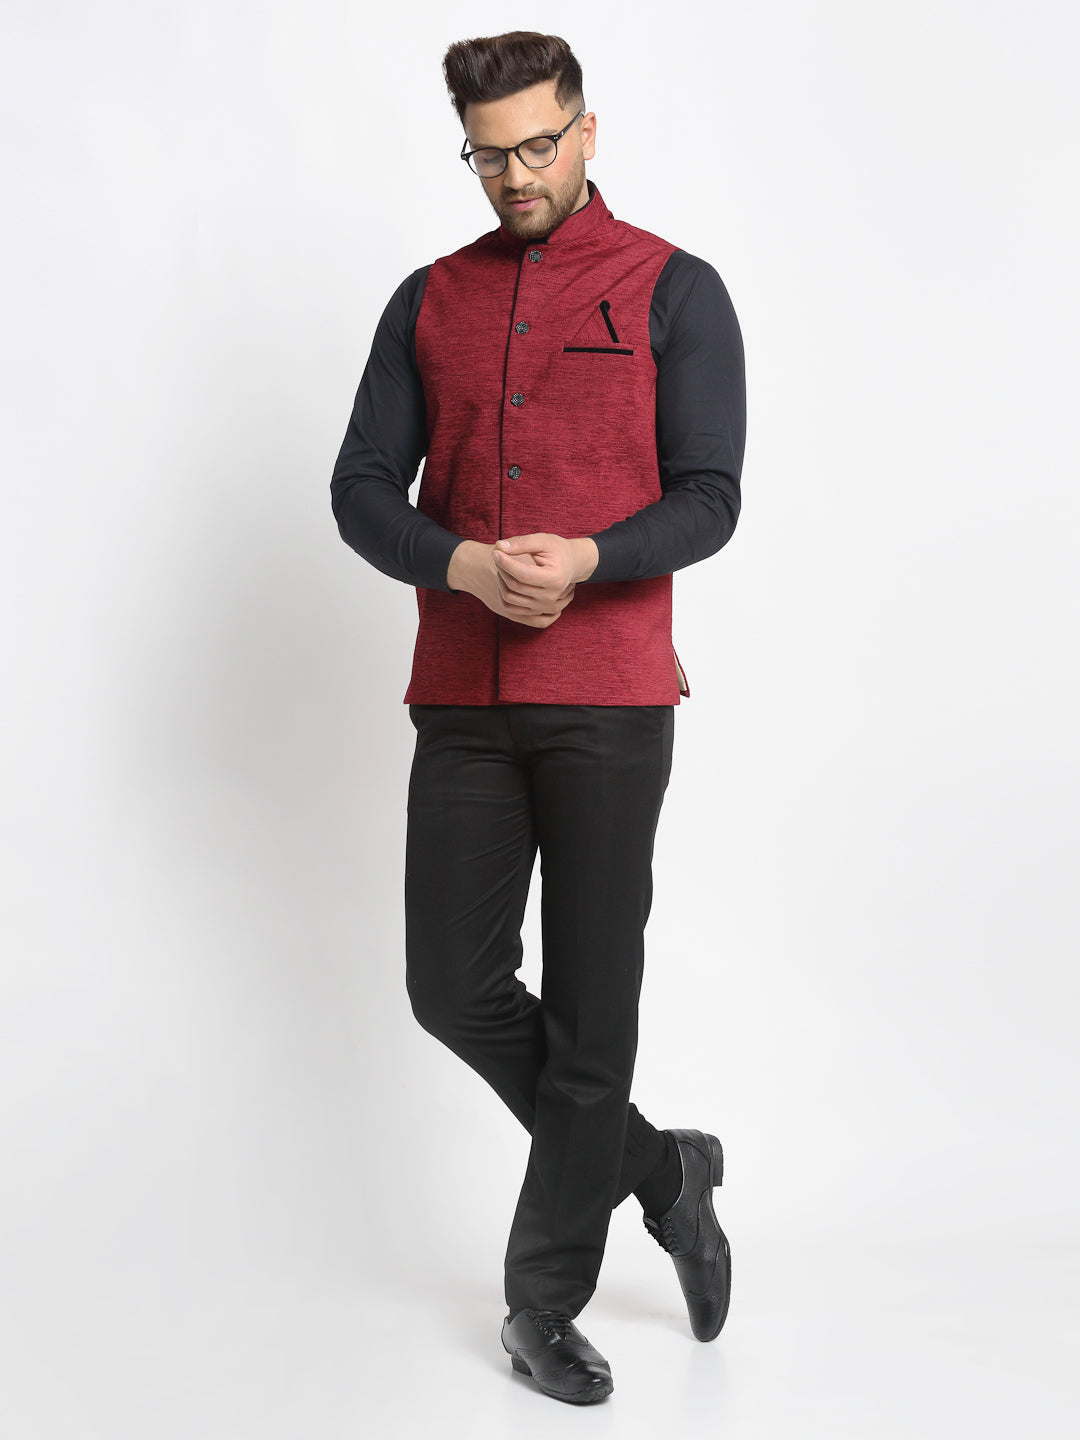 Jompers Men's Maroon Solid Nehru Jacket with Square Pocket